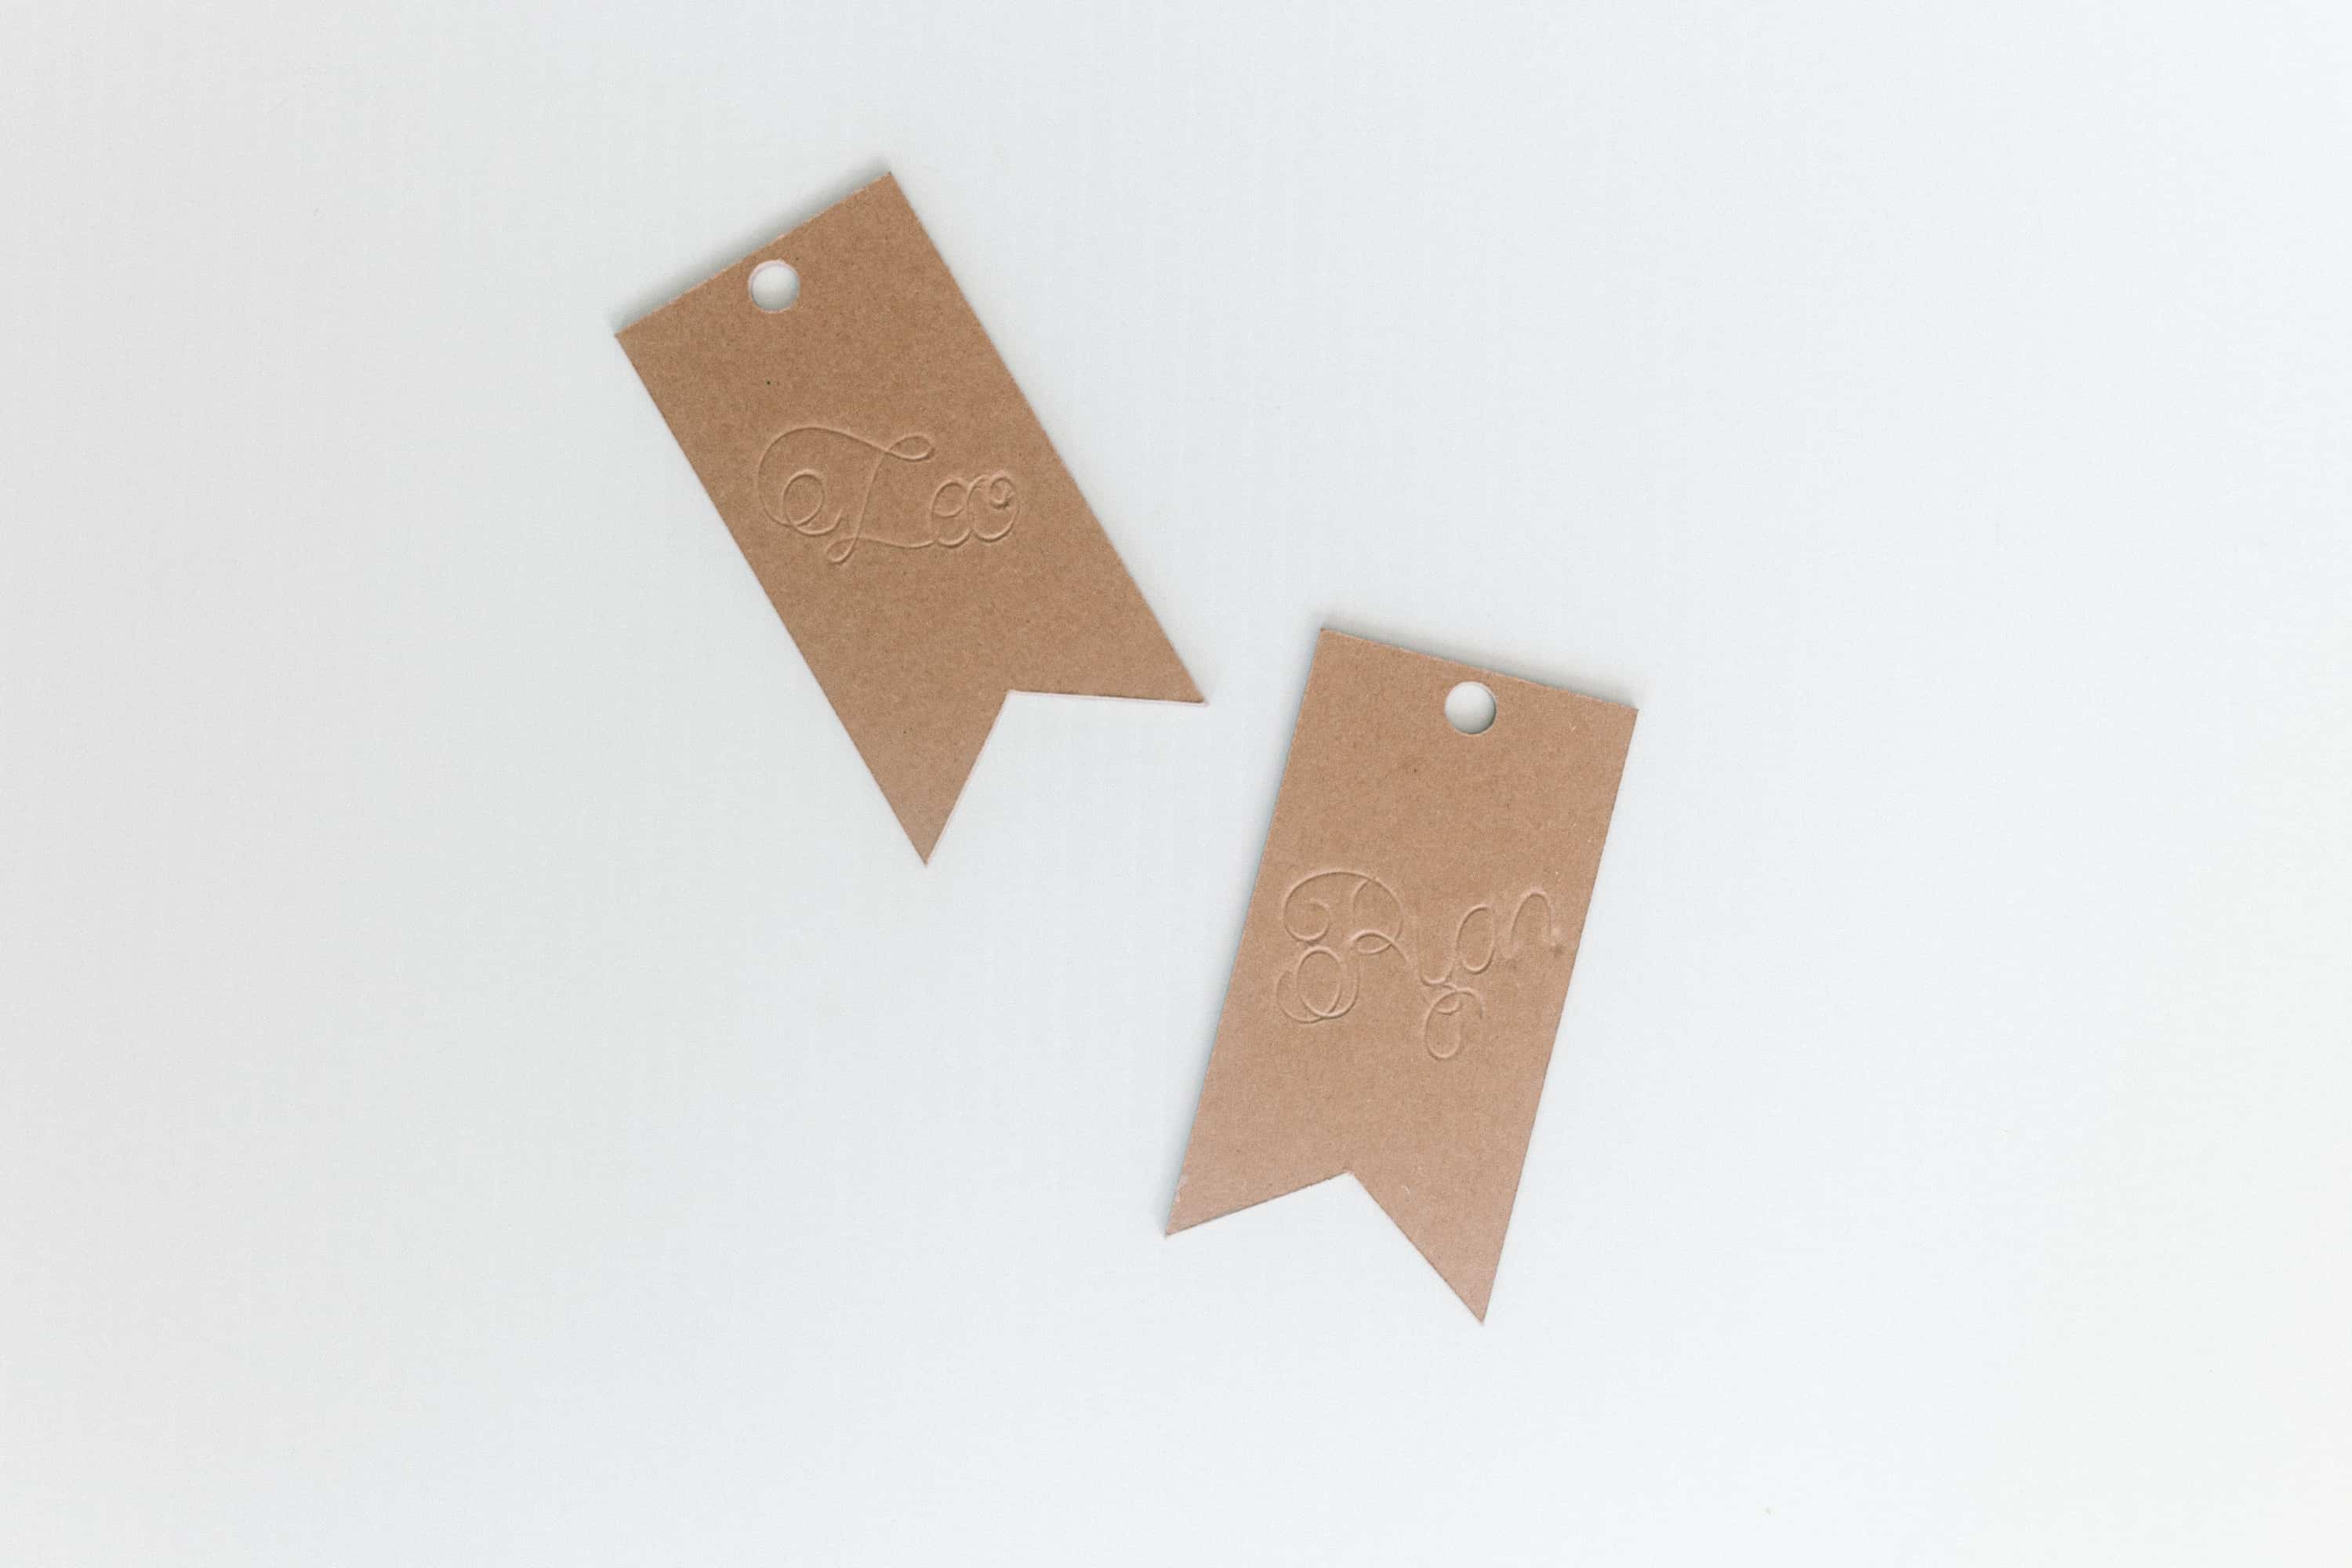 Your Cricut scoring wheel is the perfect engraving tool and I show you how with this engraved chipboard gift tags tutorial! From overthebigmoon.com!